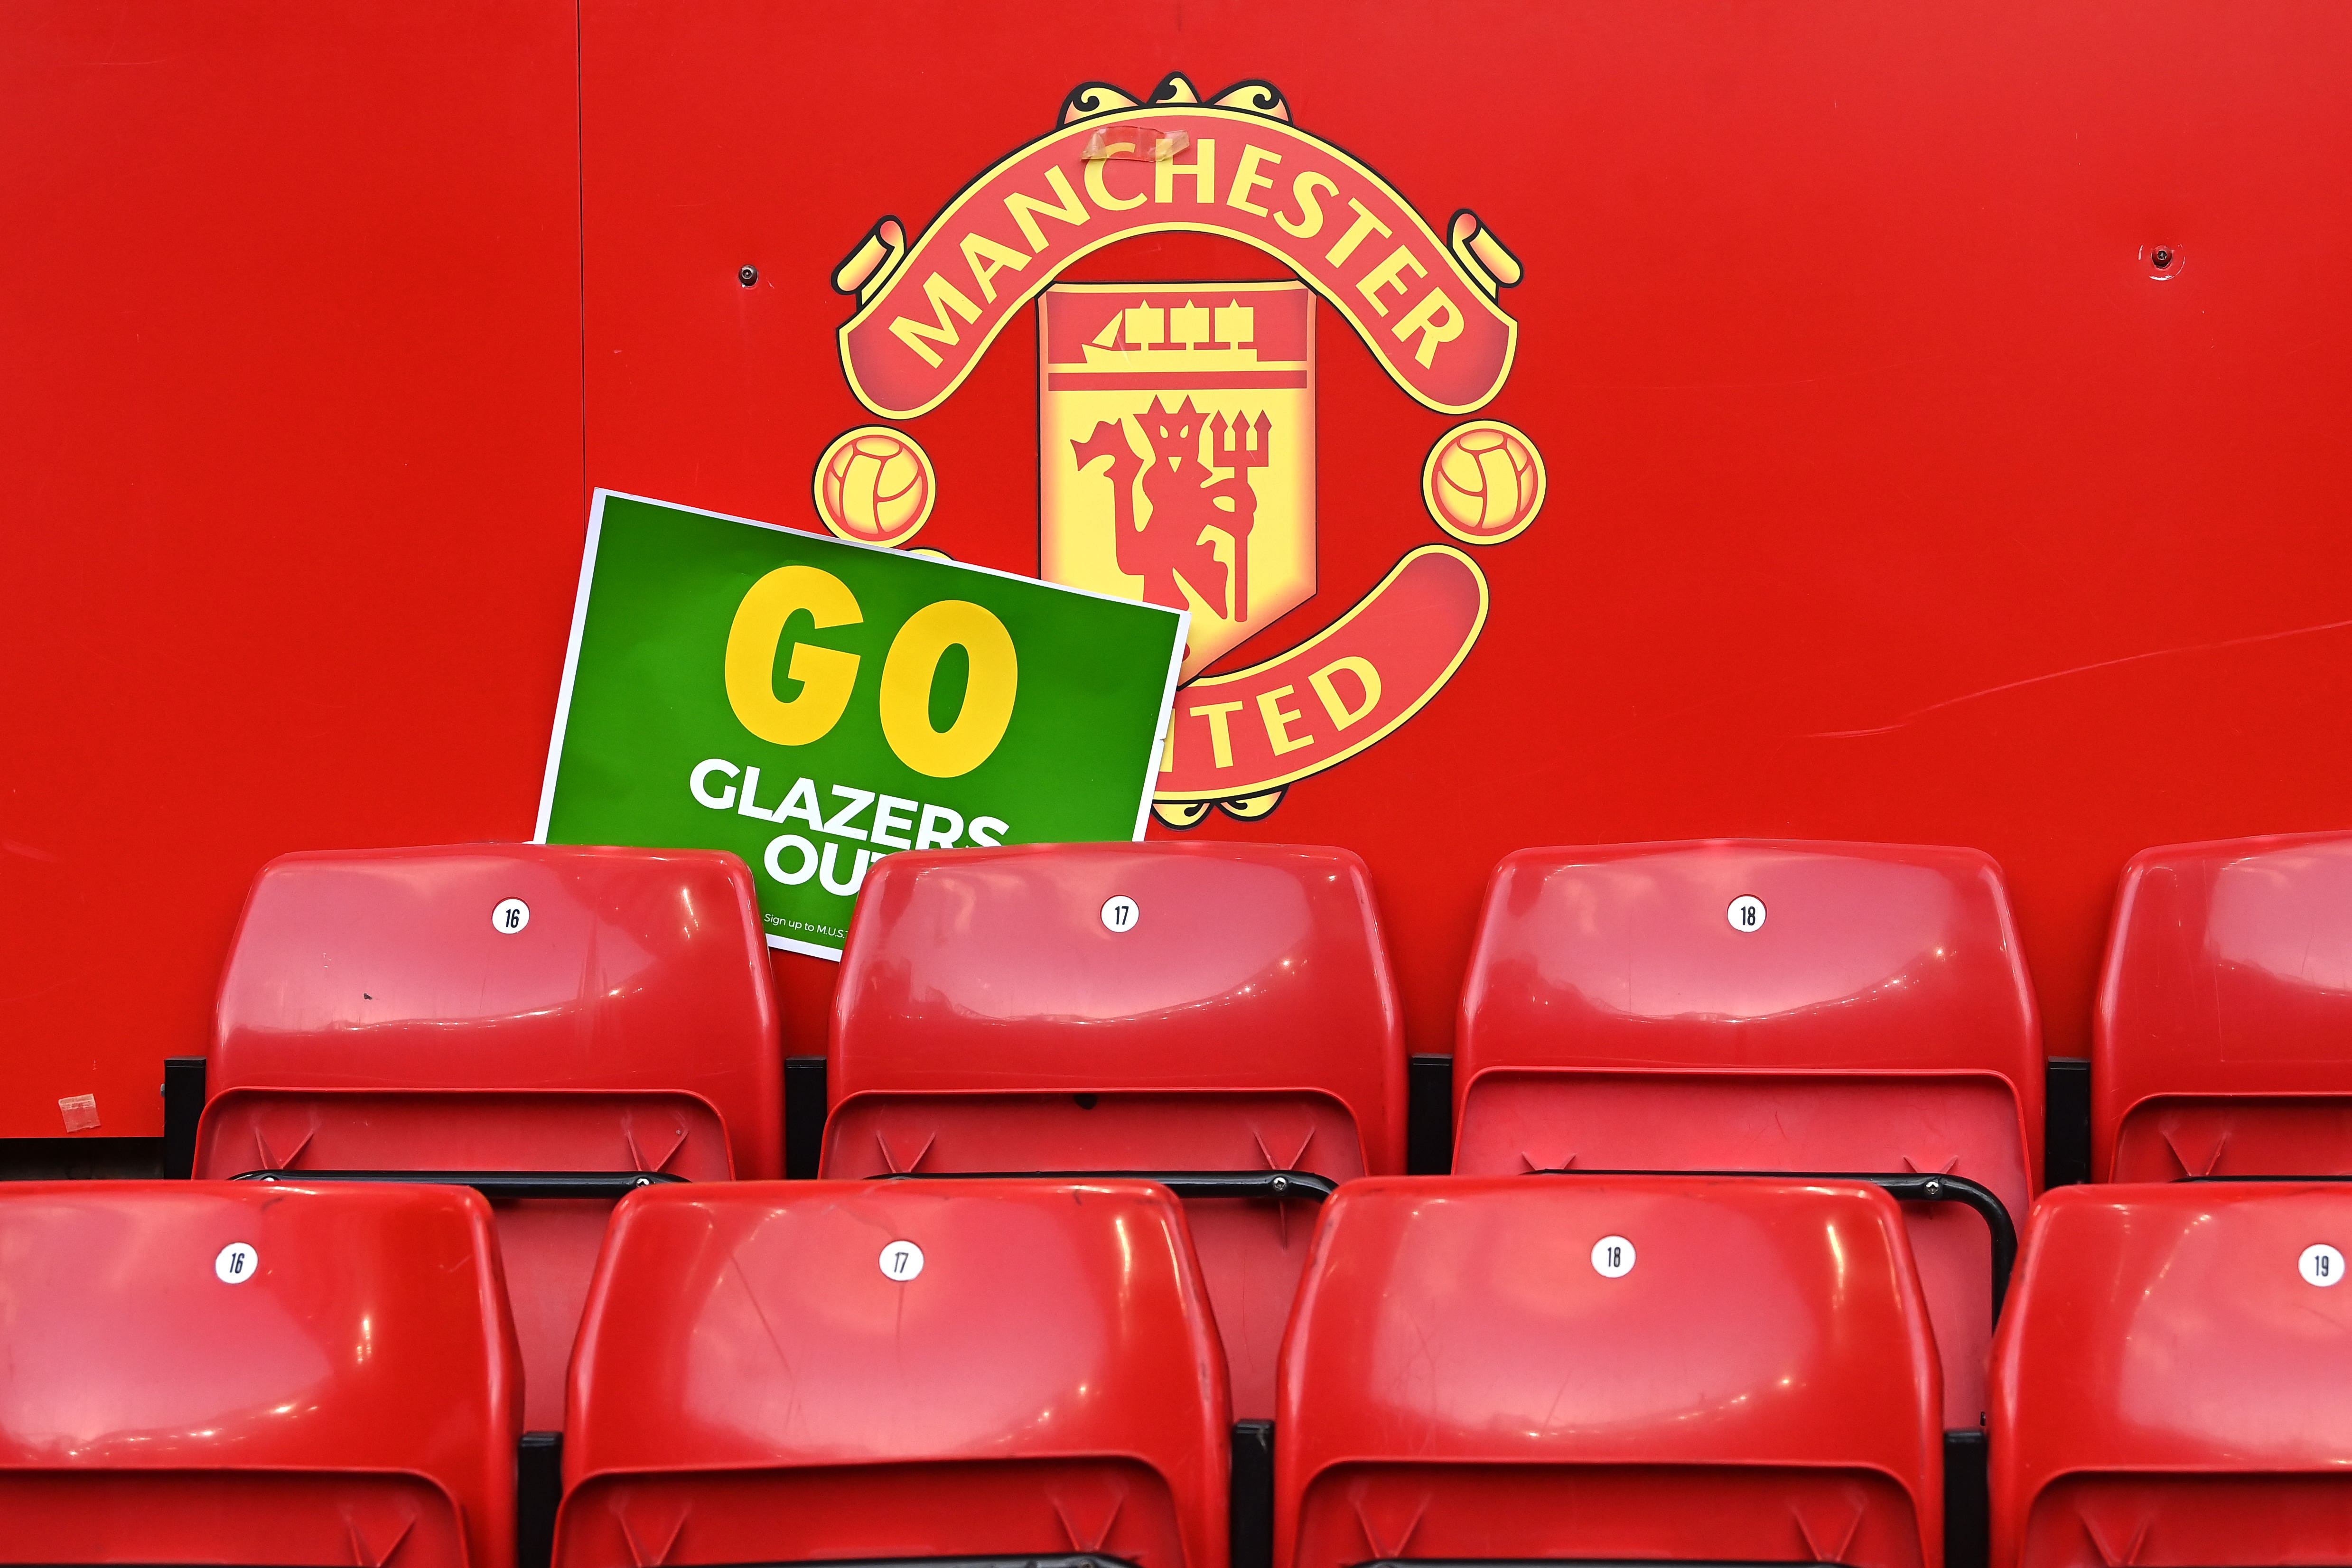 Manchester United’s owners the Glazer family have effectively put the club up for sale (Laurence Griffiths/PA)